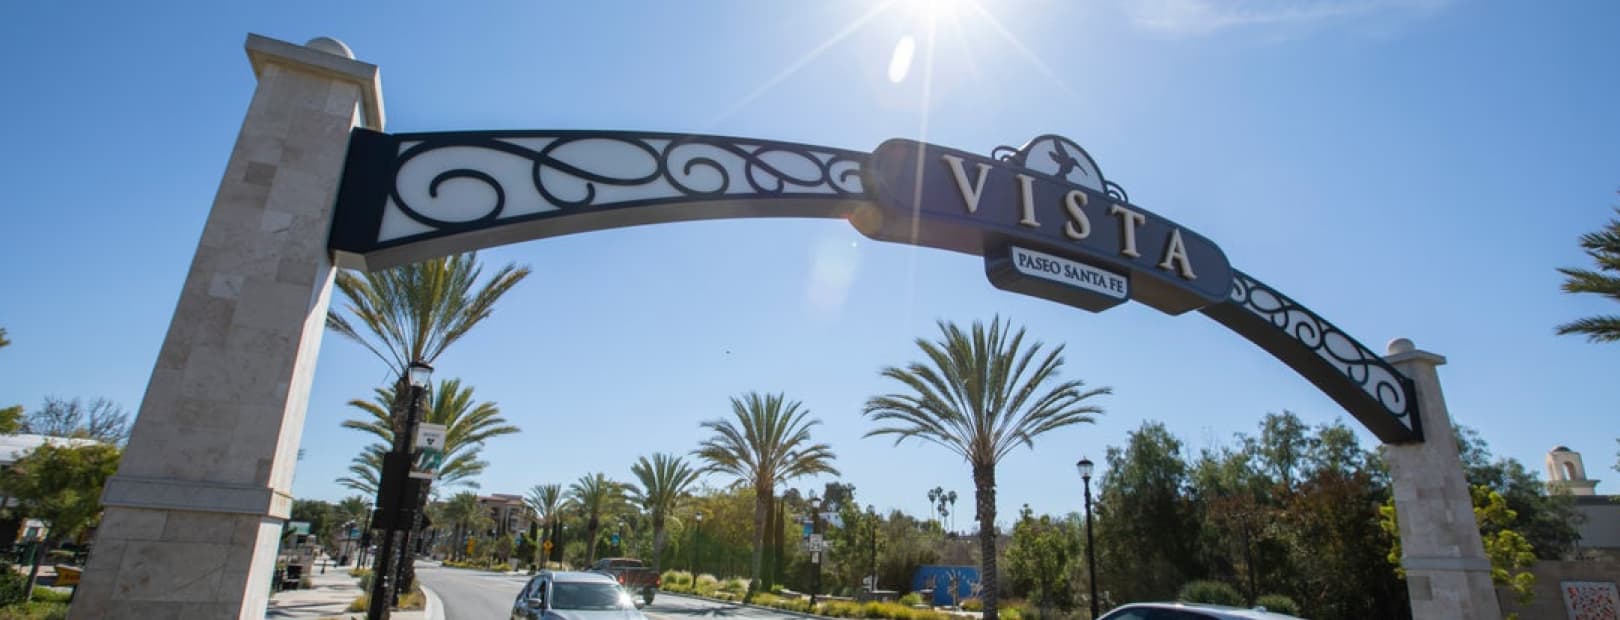 things to do in vista